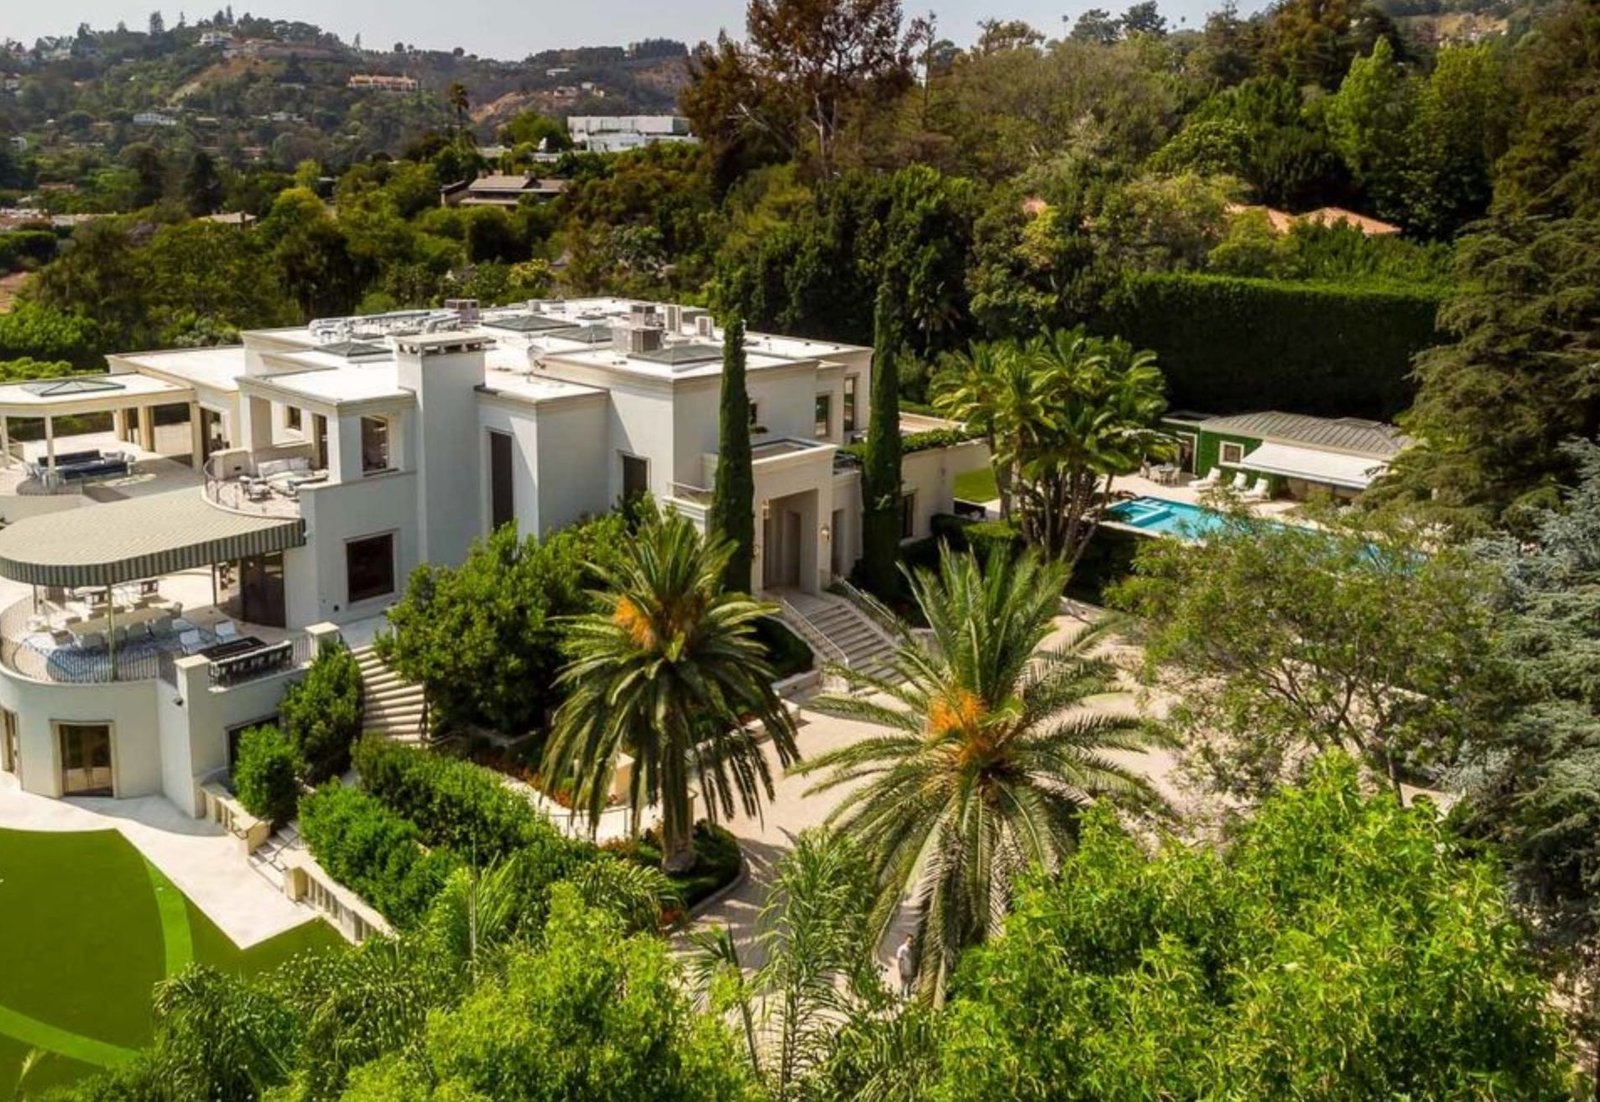 Beverly Hills Gated Estate - Los Angeles - California Luxury Real Estate - Immobilier de Luxe USA